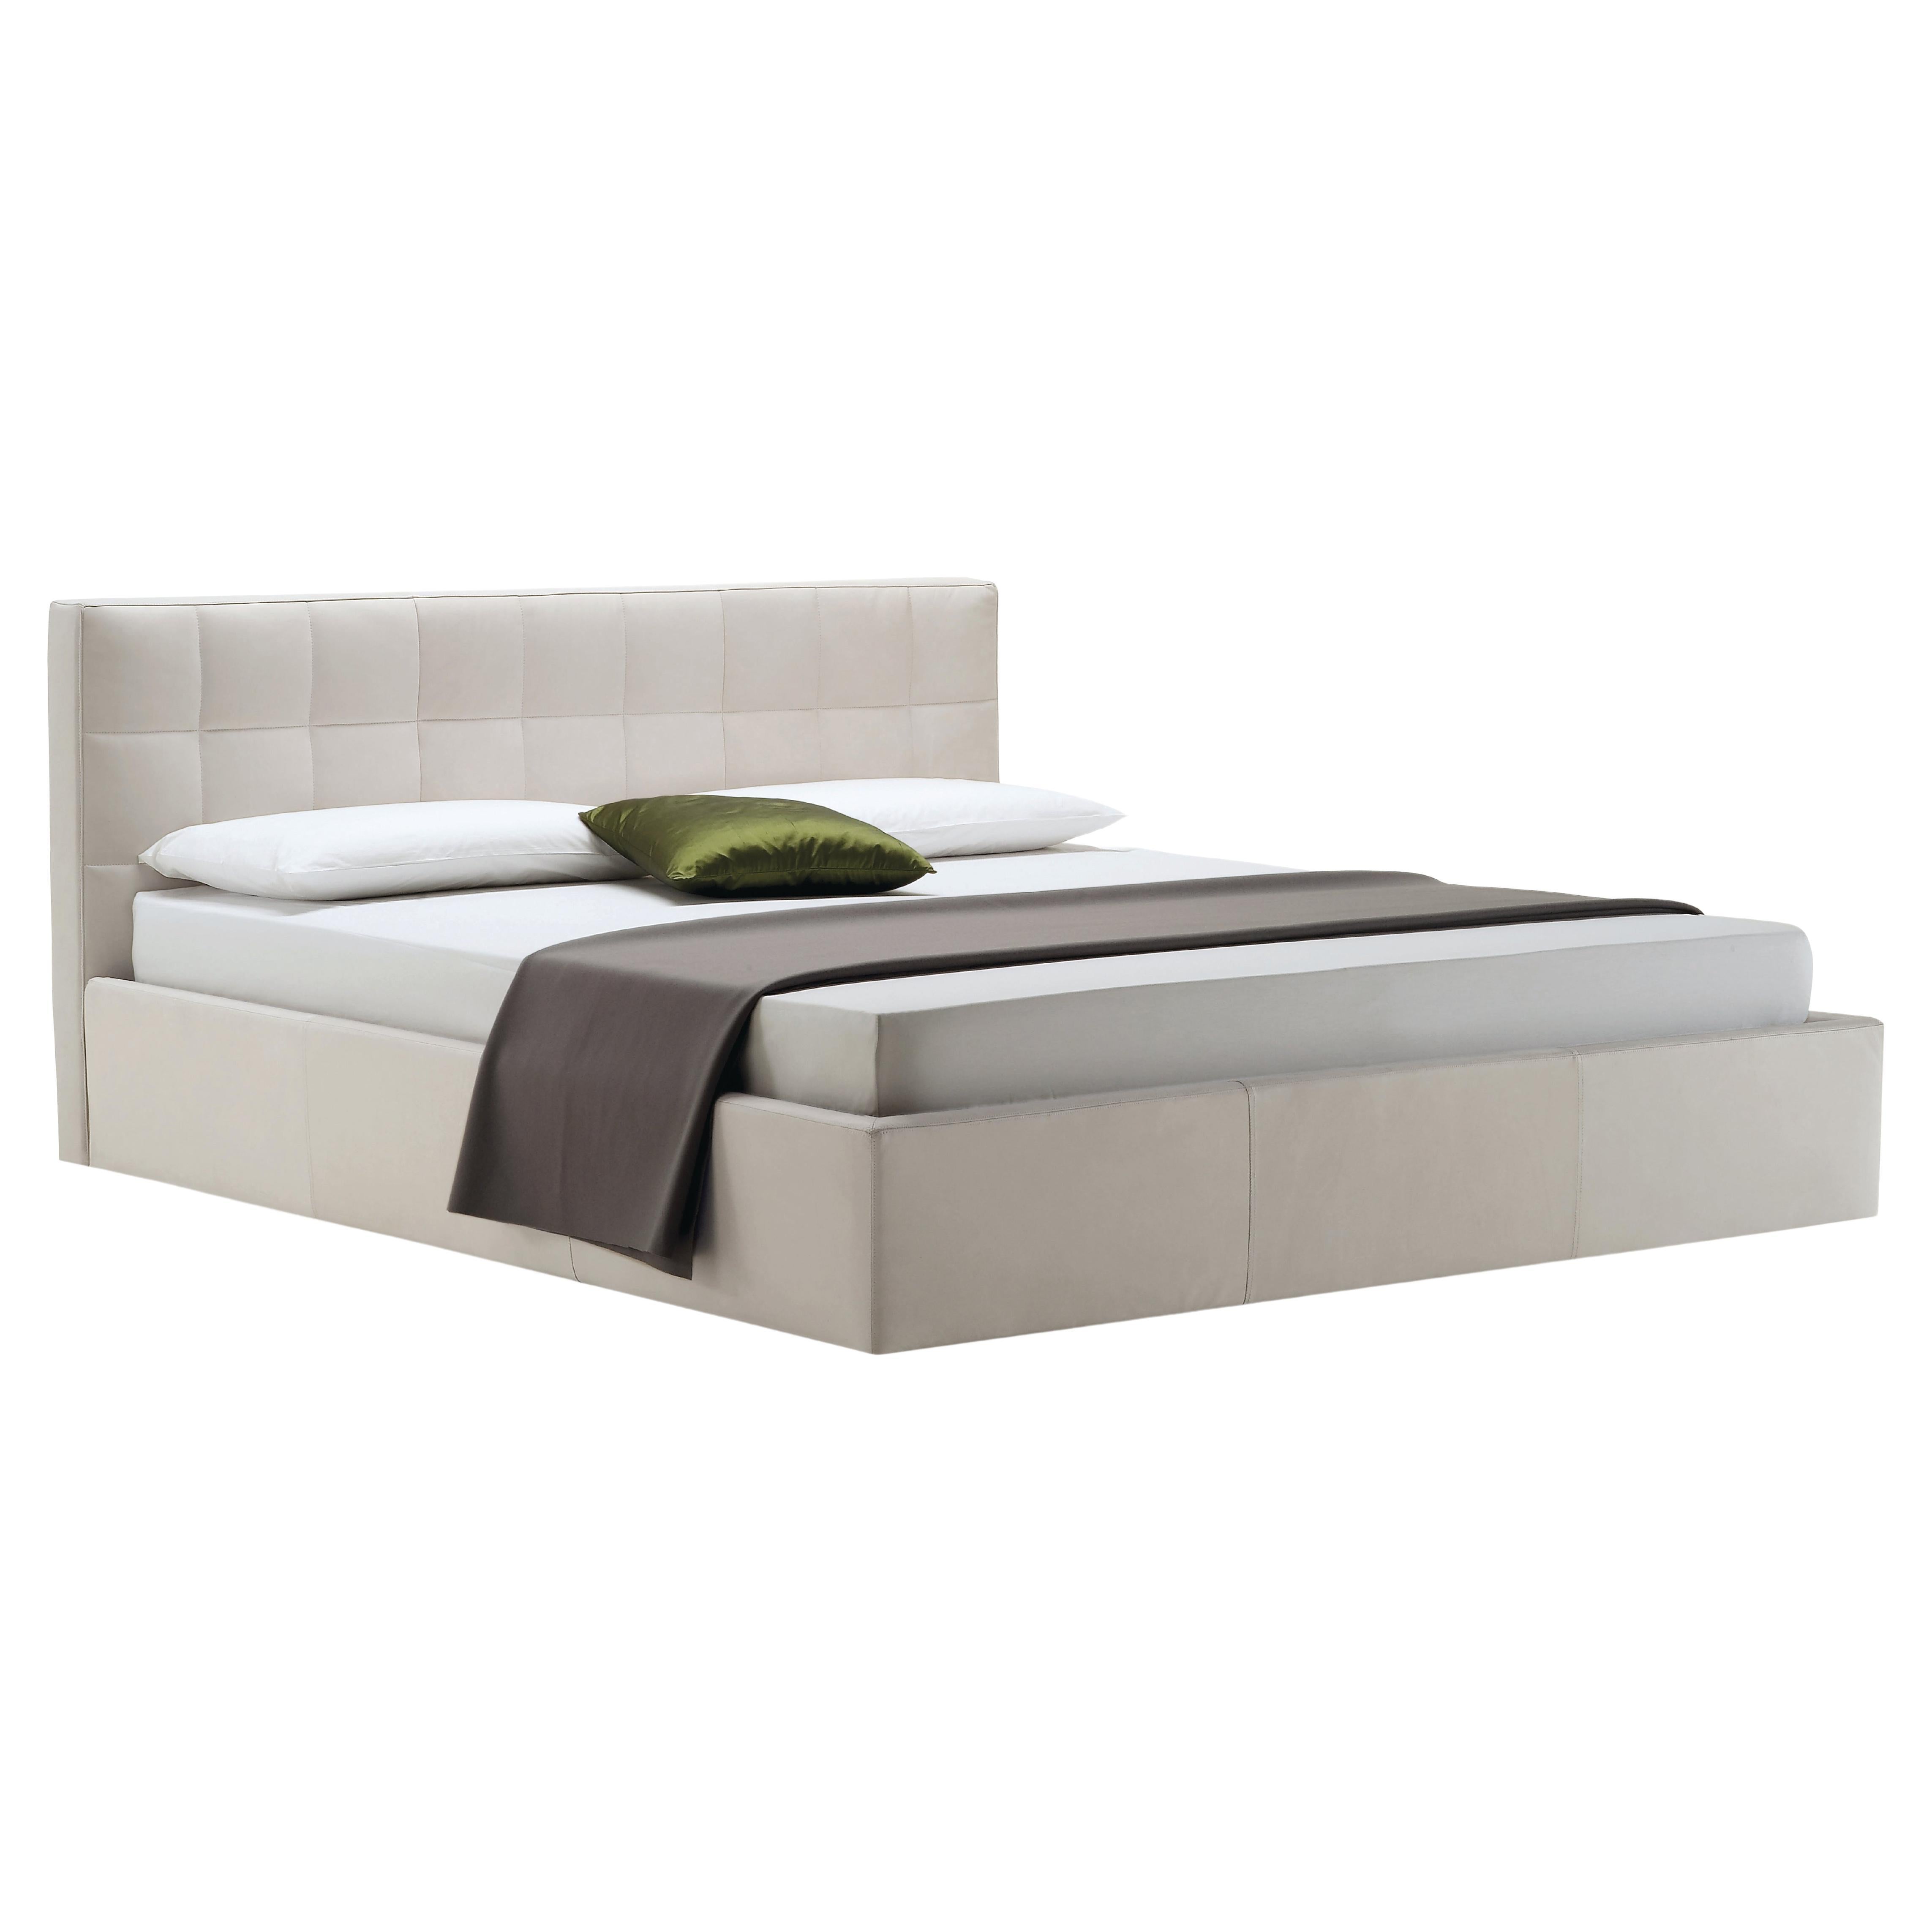 Zanotta Large Box Bed without Container Unit in Beige Upholstery & Steel Frame For Sale